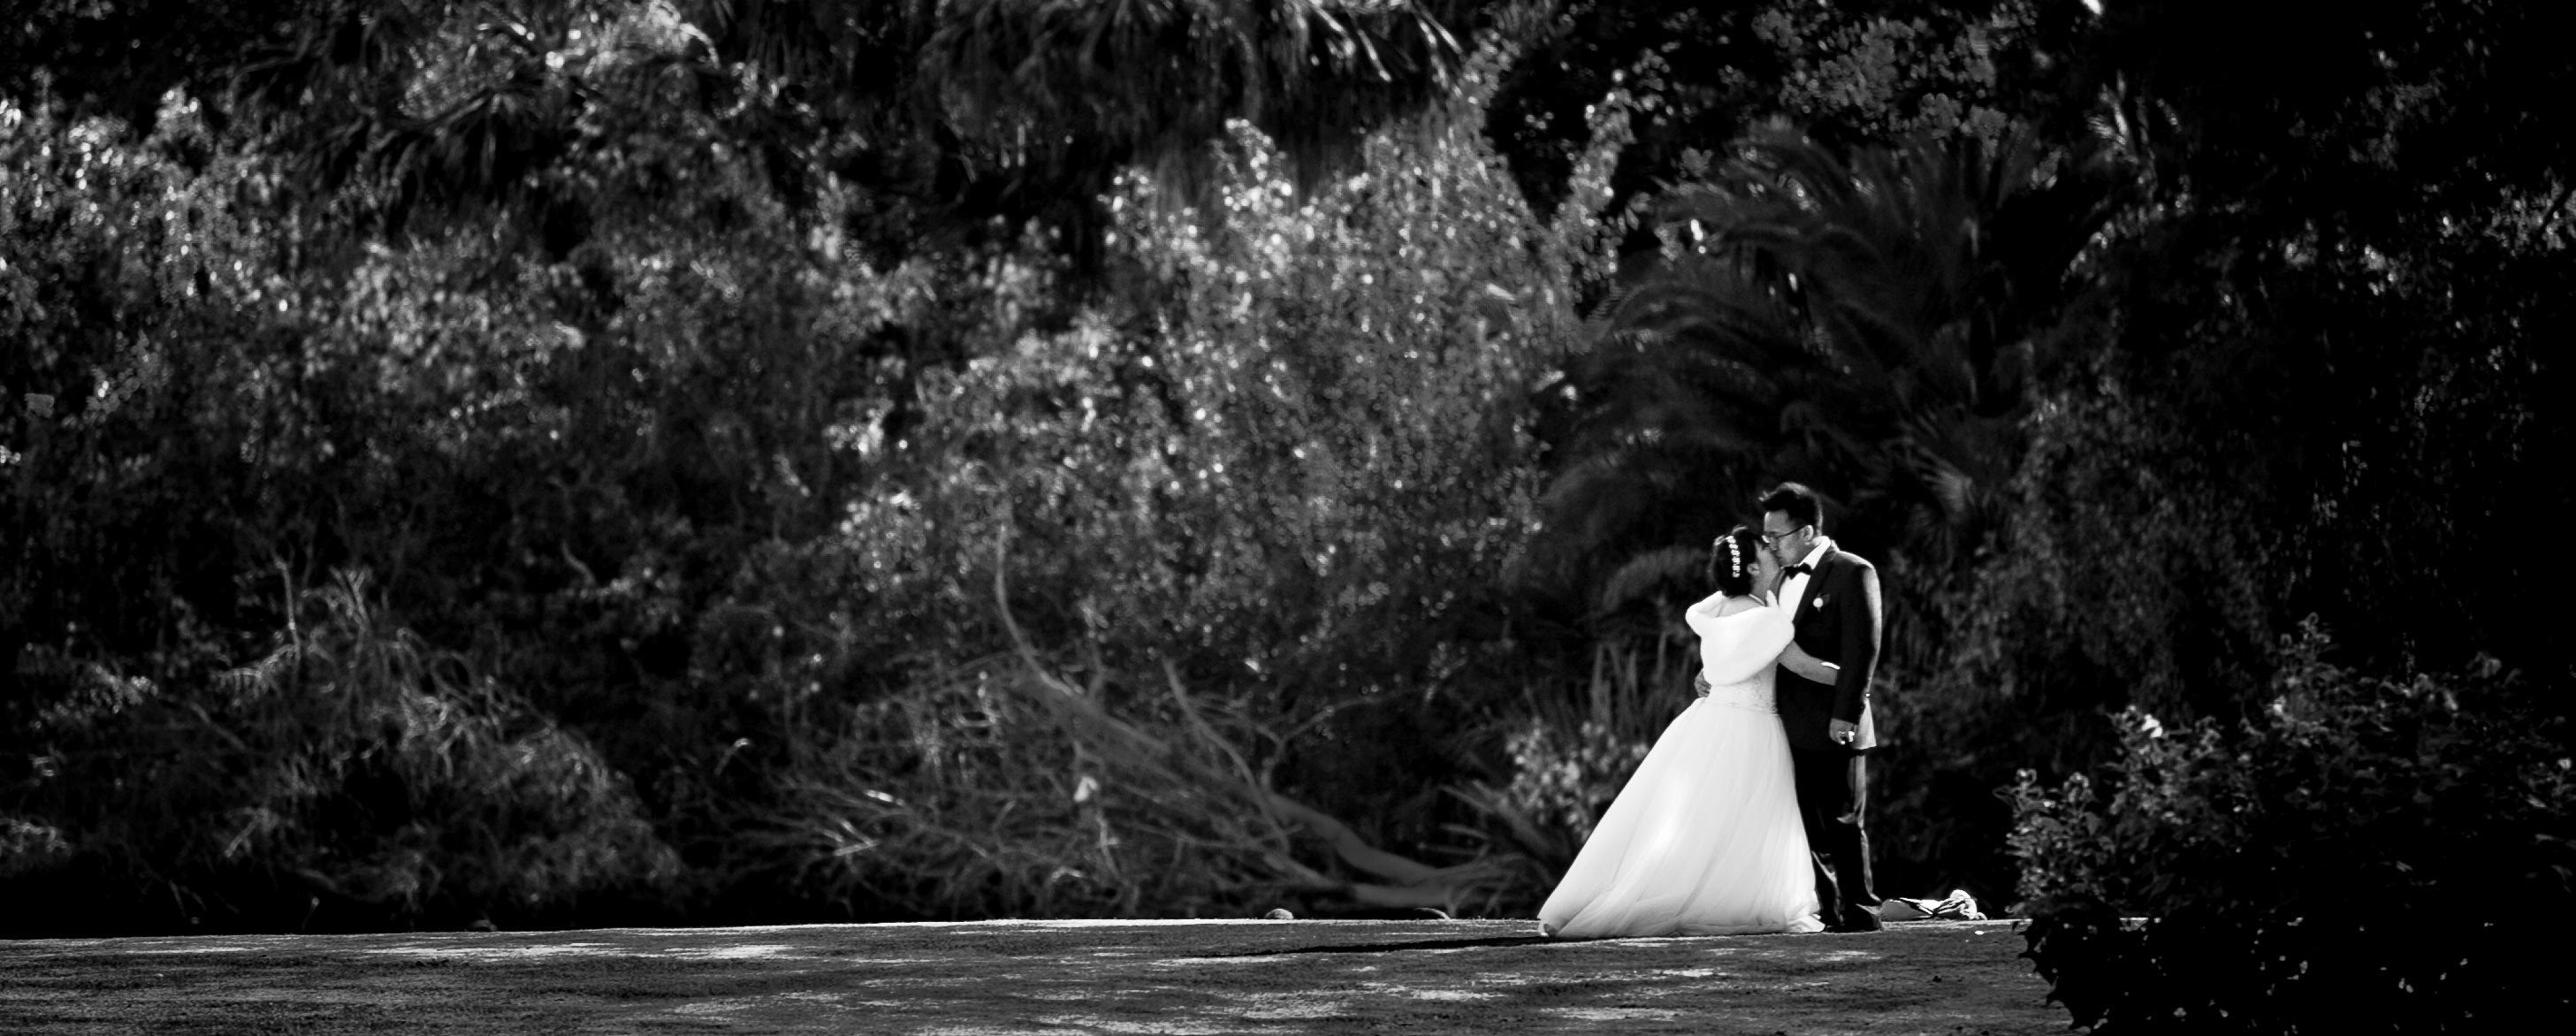 Melbourne Wedding Photography Slideshow by Ash Milne Photography